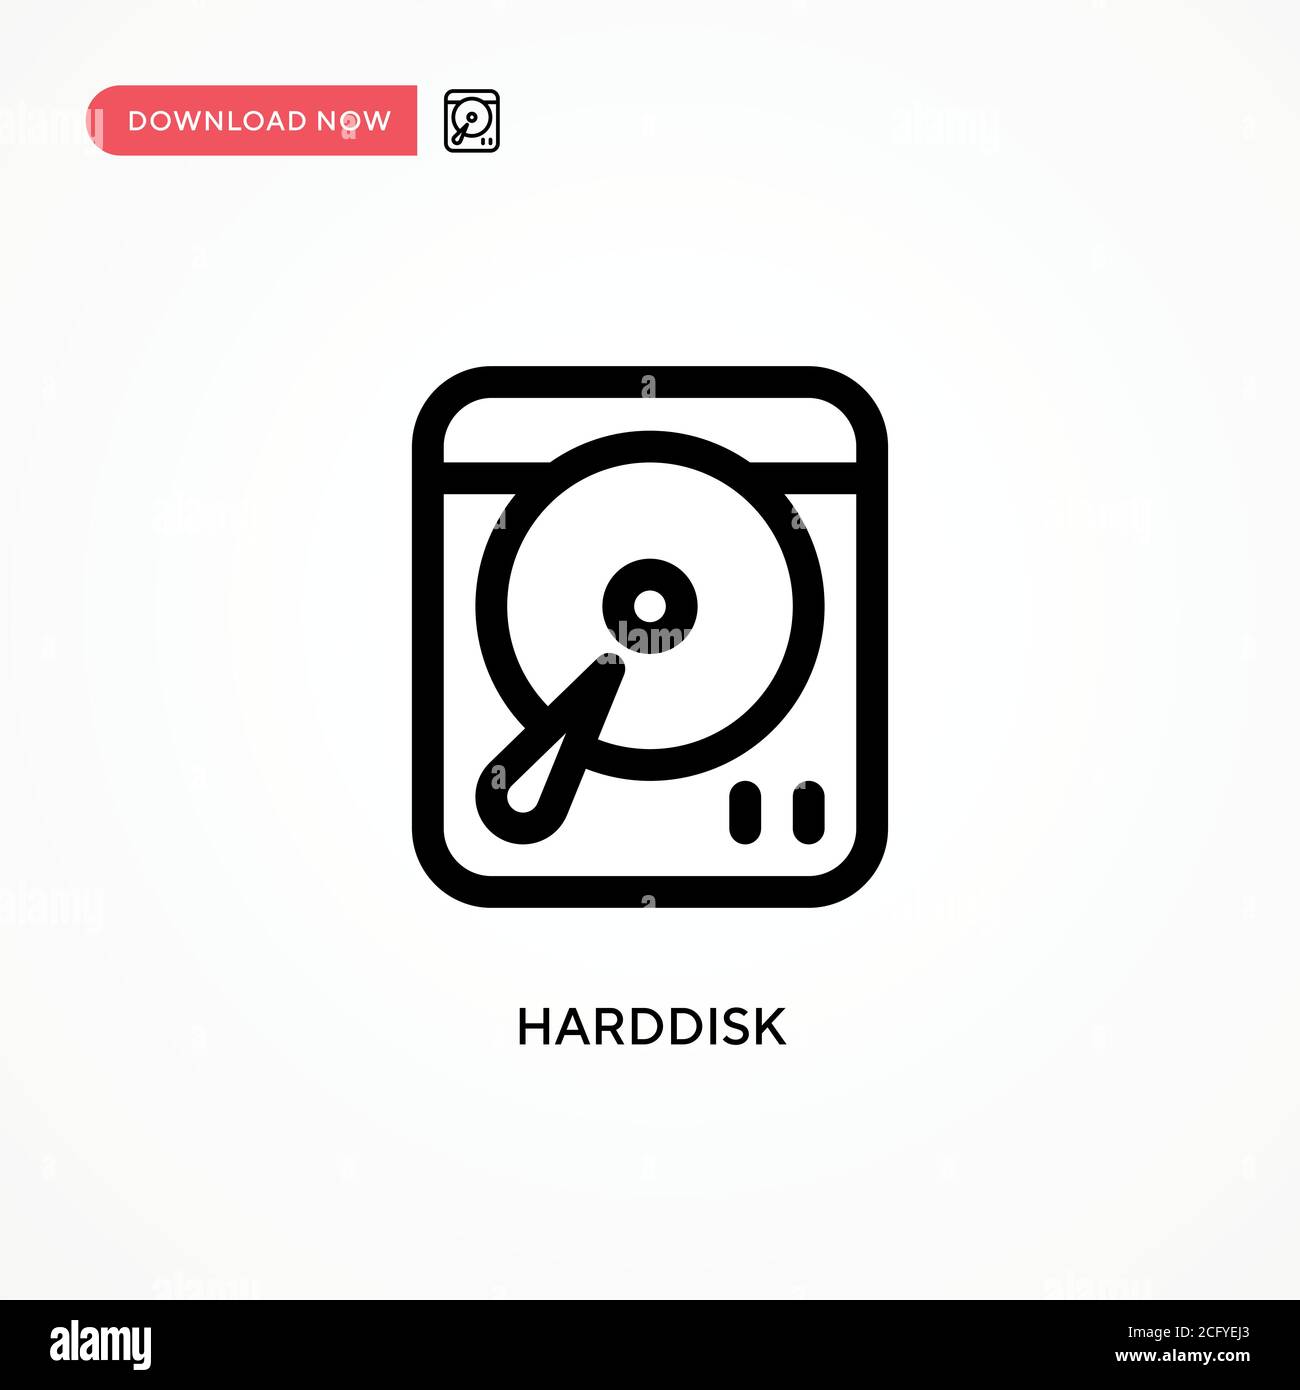 Harddisk Simple vector icon. Modern, simple flat vector illustration for web site or mobile app Stock Vector